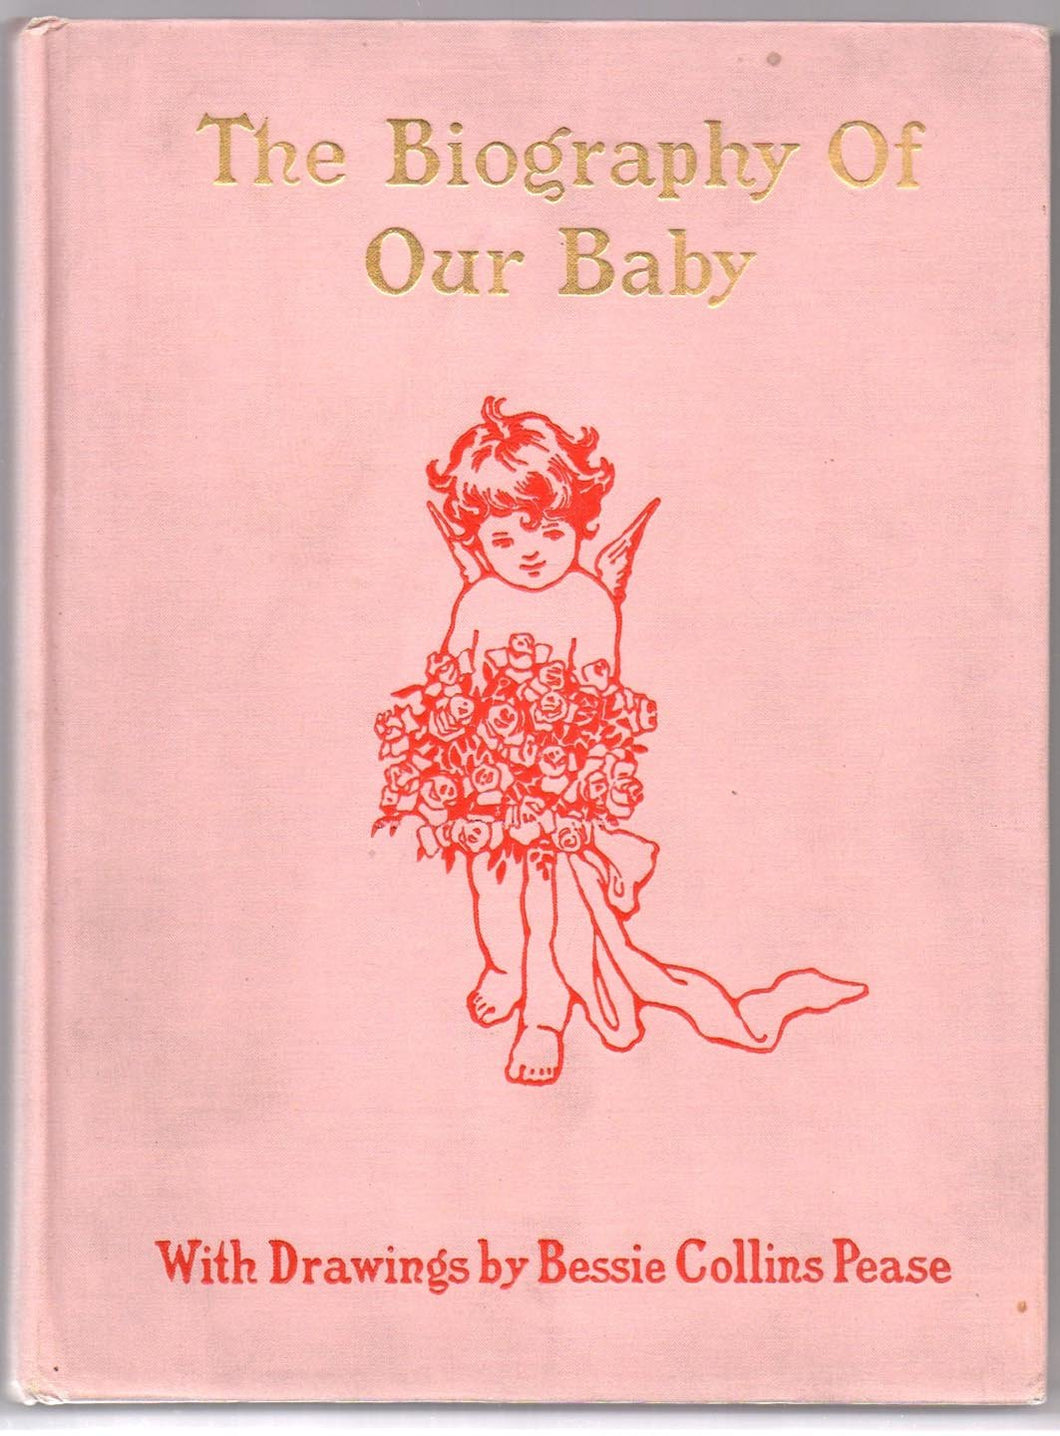 The Biography of Our Baby